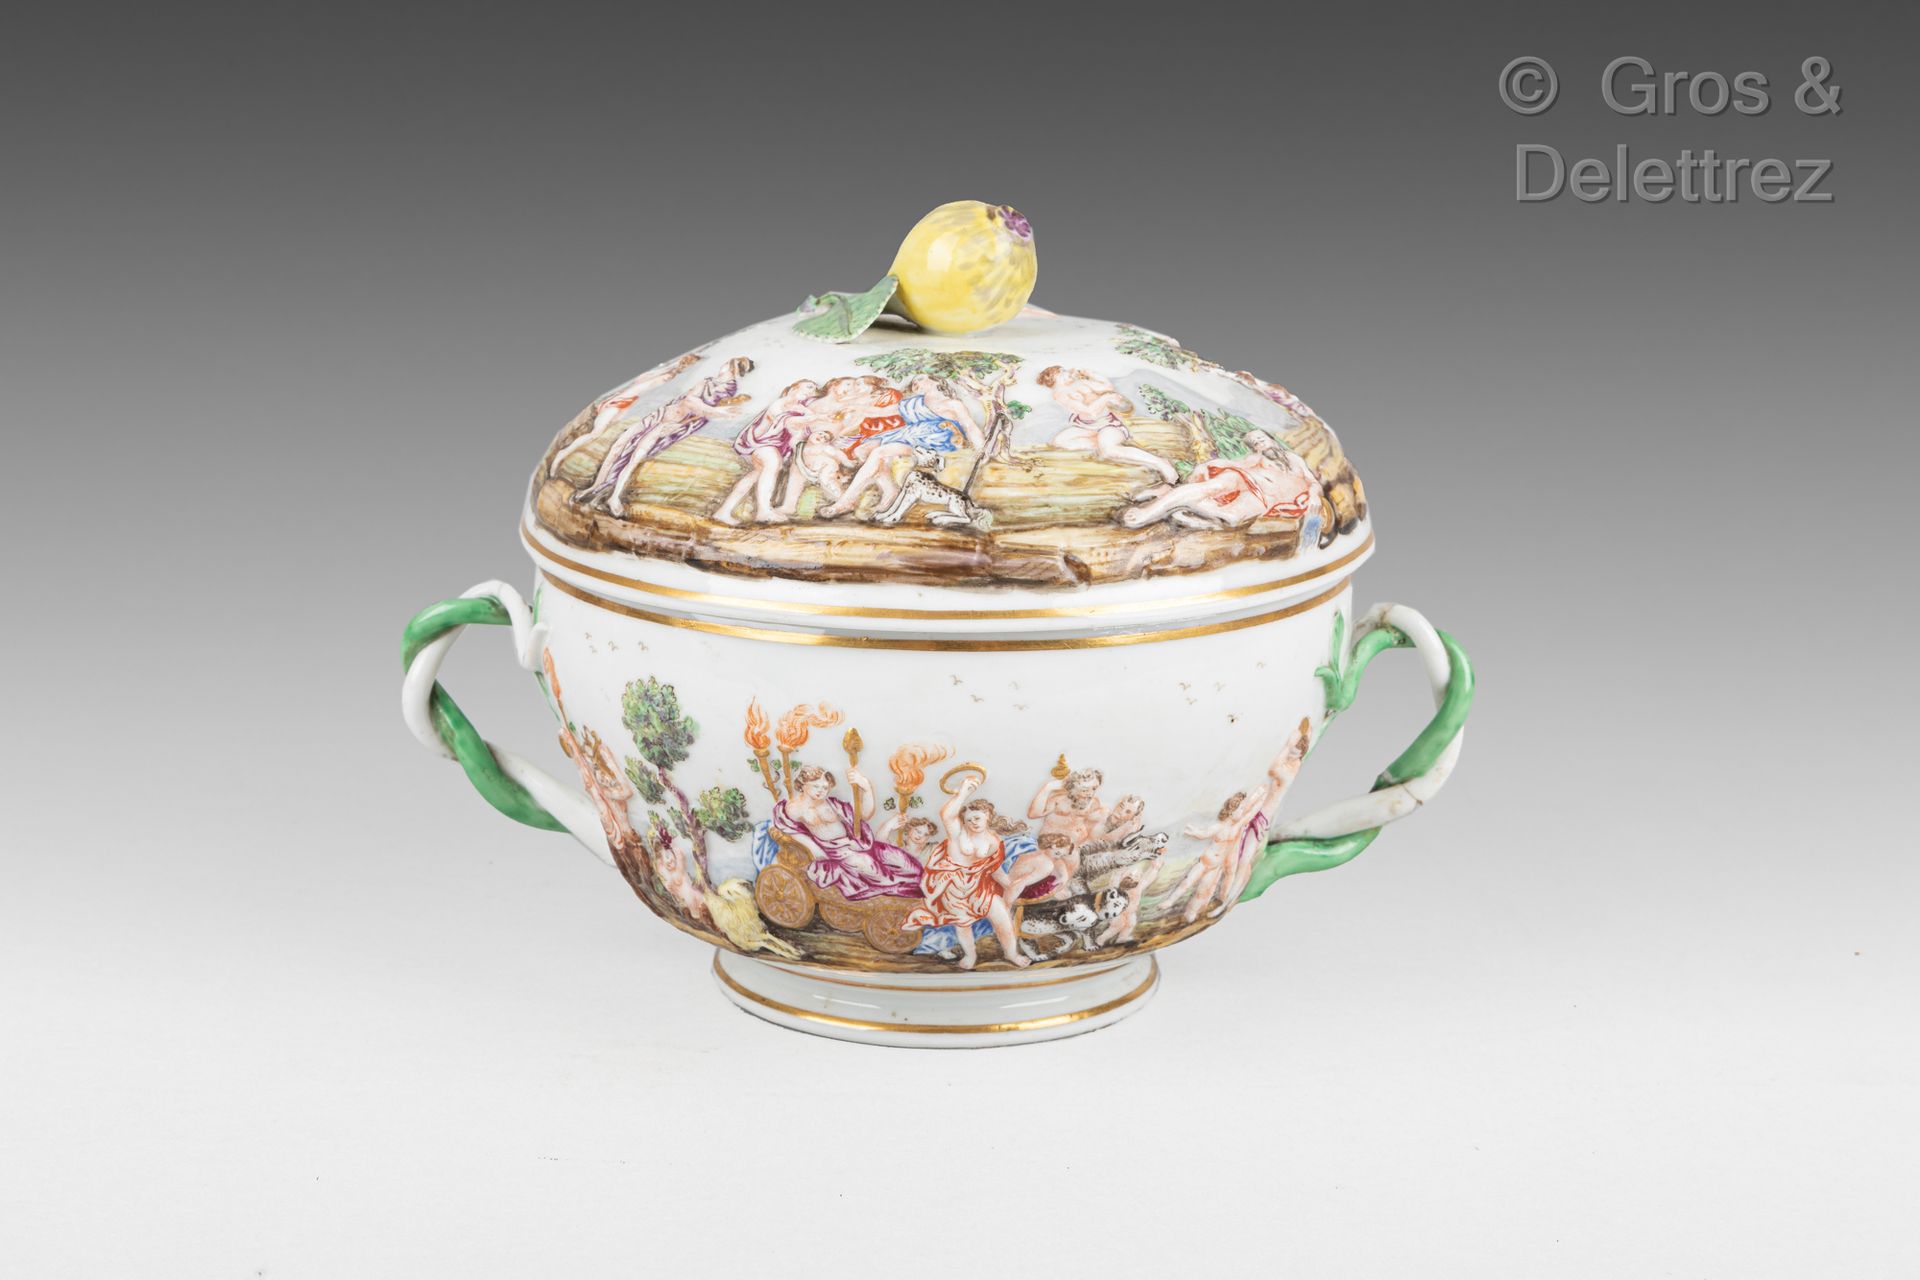 Null DOCCIA, 19th century

Porcelain box in the taste of the 18th century, the h&hellip;